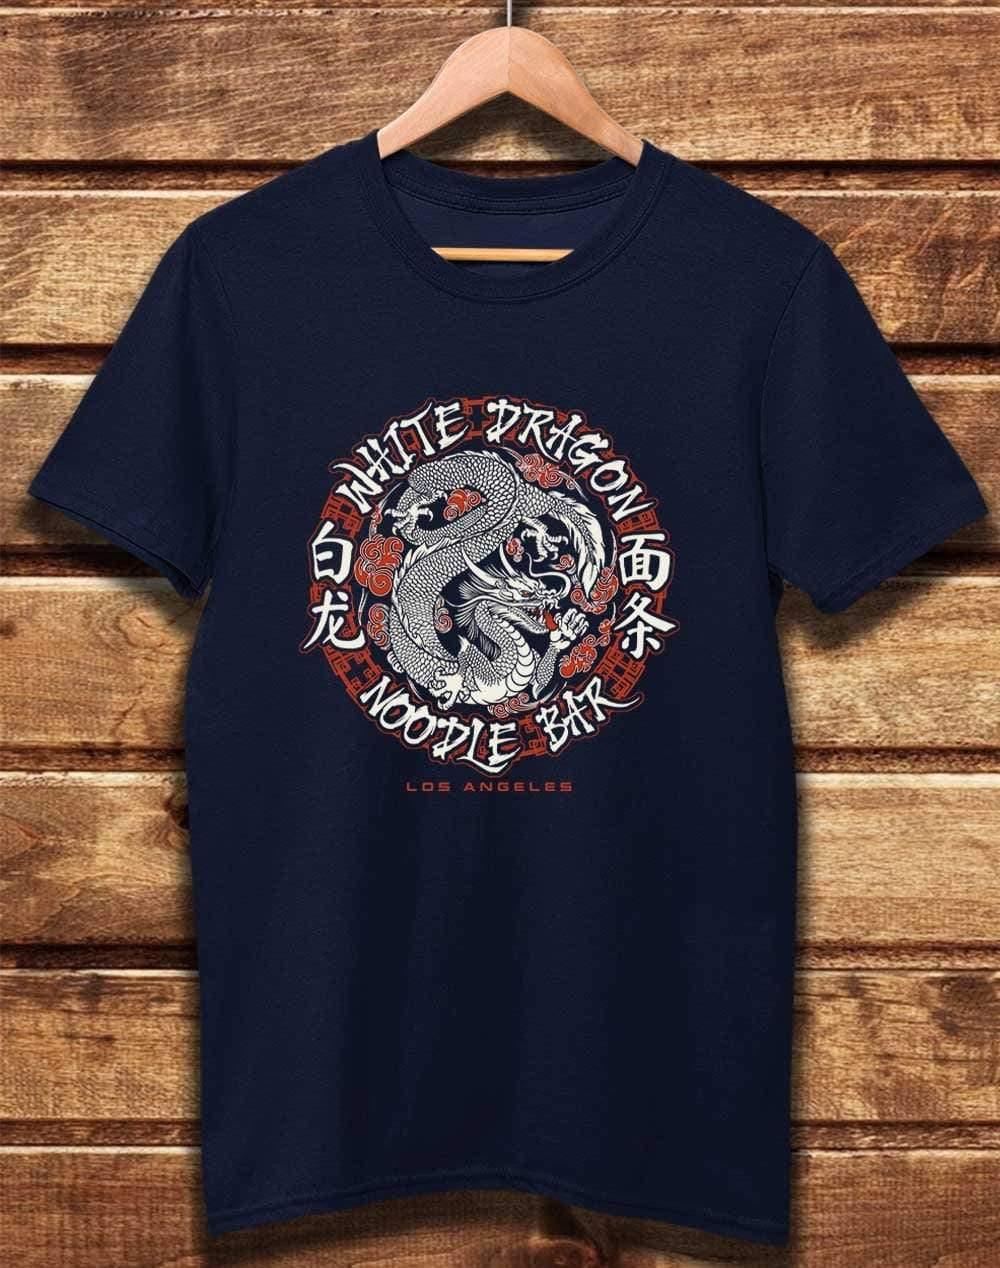 DELUXE White Dragon Noodle Bar Organic Cotton T-Shirt XS / Navy  - Off World Tees